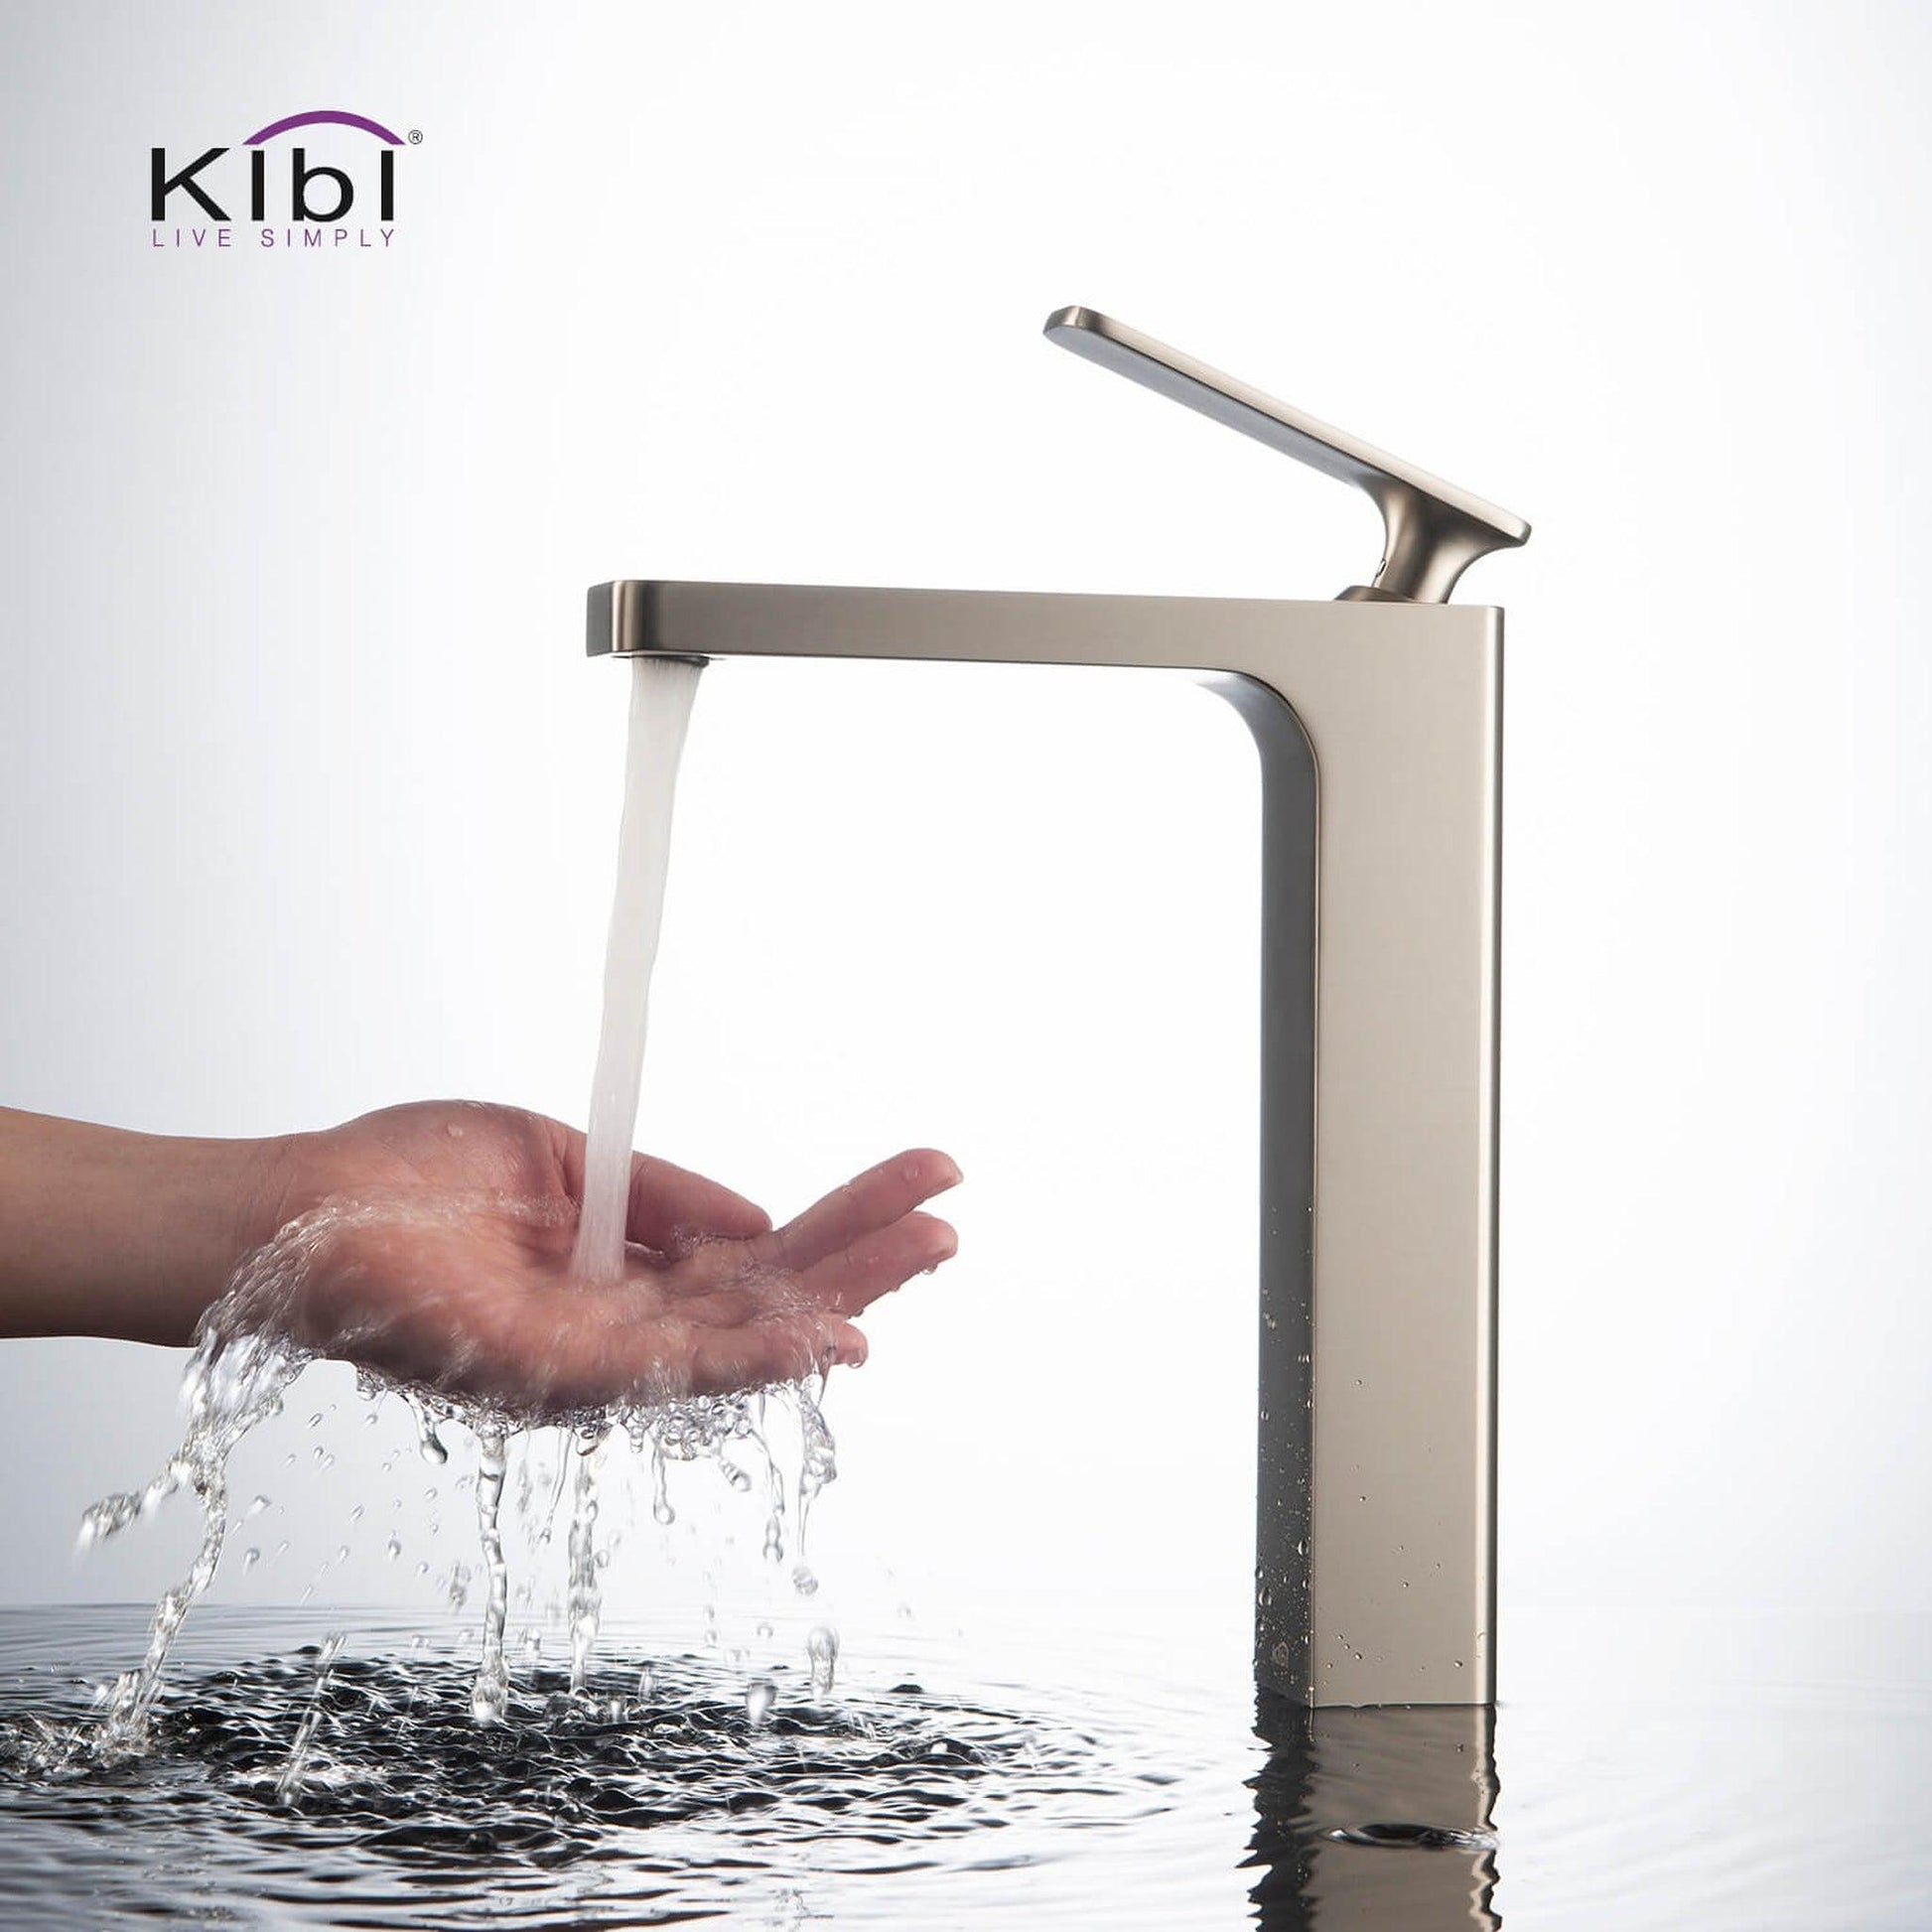 KIBI Infinity Single Handle Brushed Nickel Solid Brass Bathroom Vanity Vessel Sink Faucet With Pop-Up Drain Stopper Small Cover Without Overflow